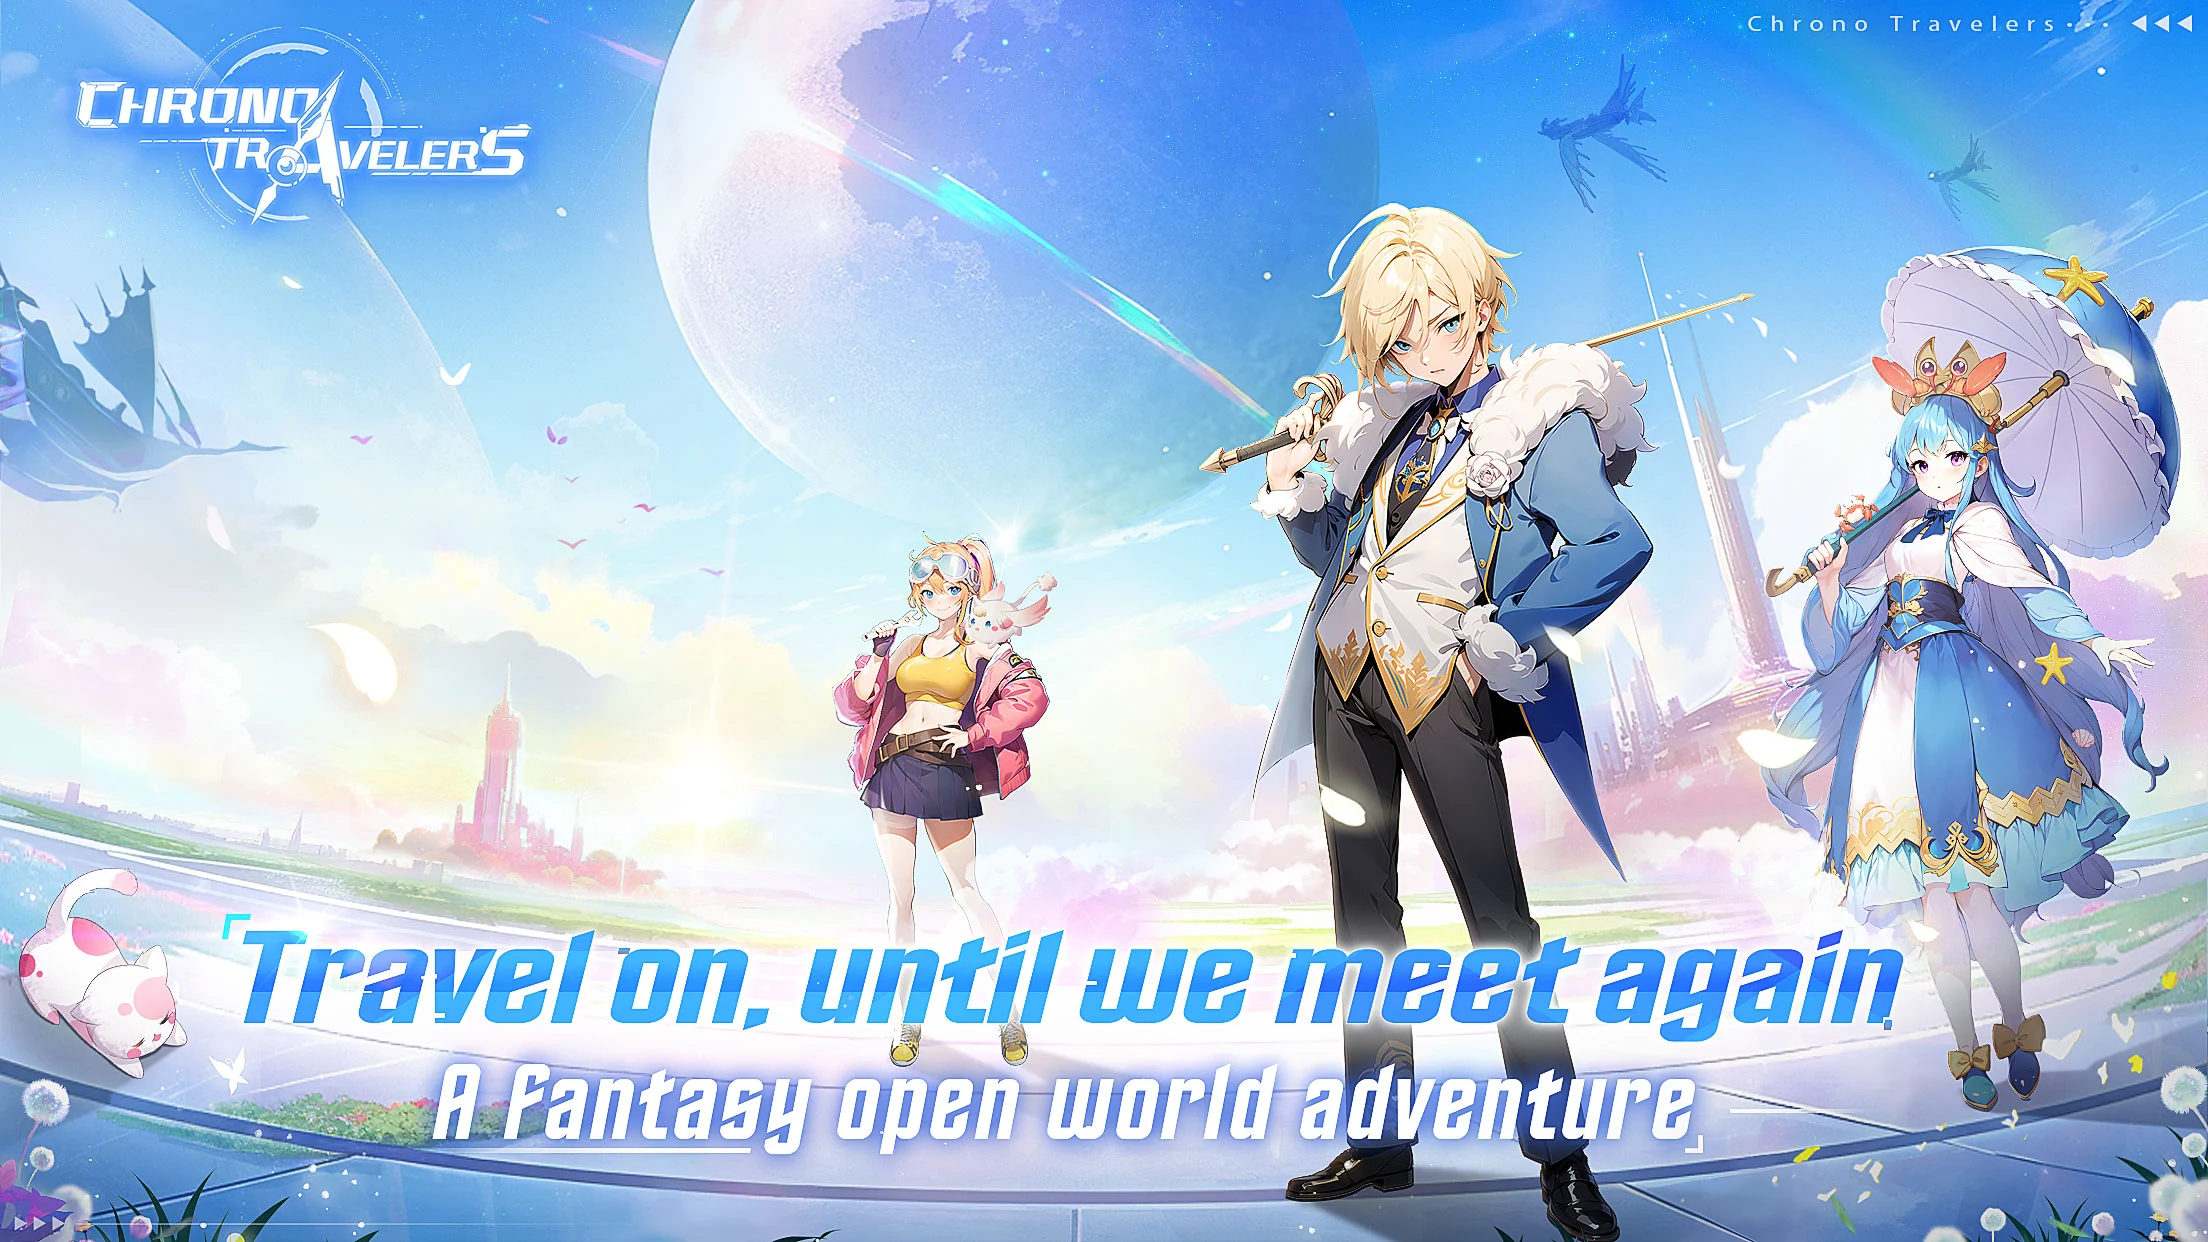 EYOUGAME’s Chrono Travelers Is Now Open For Pre-Registrations on Android